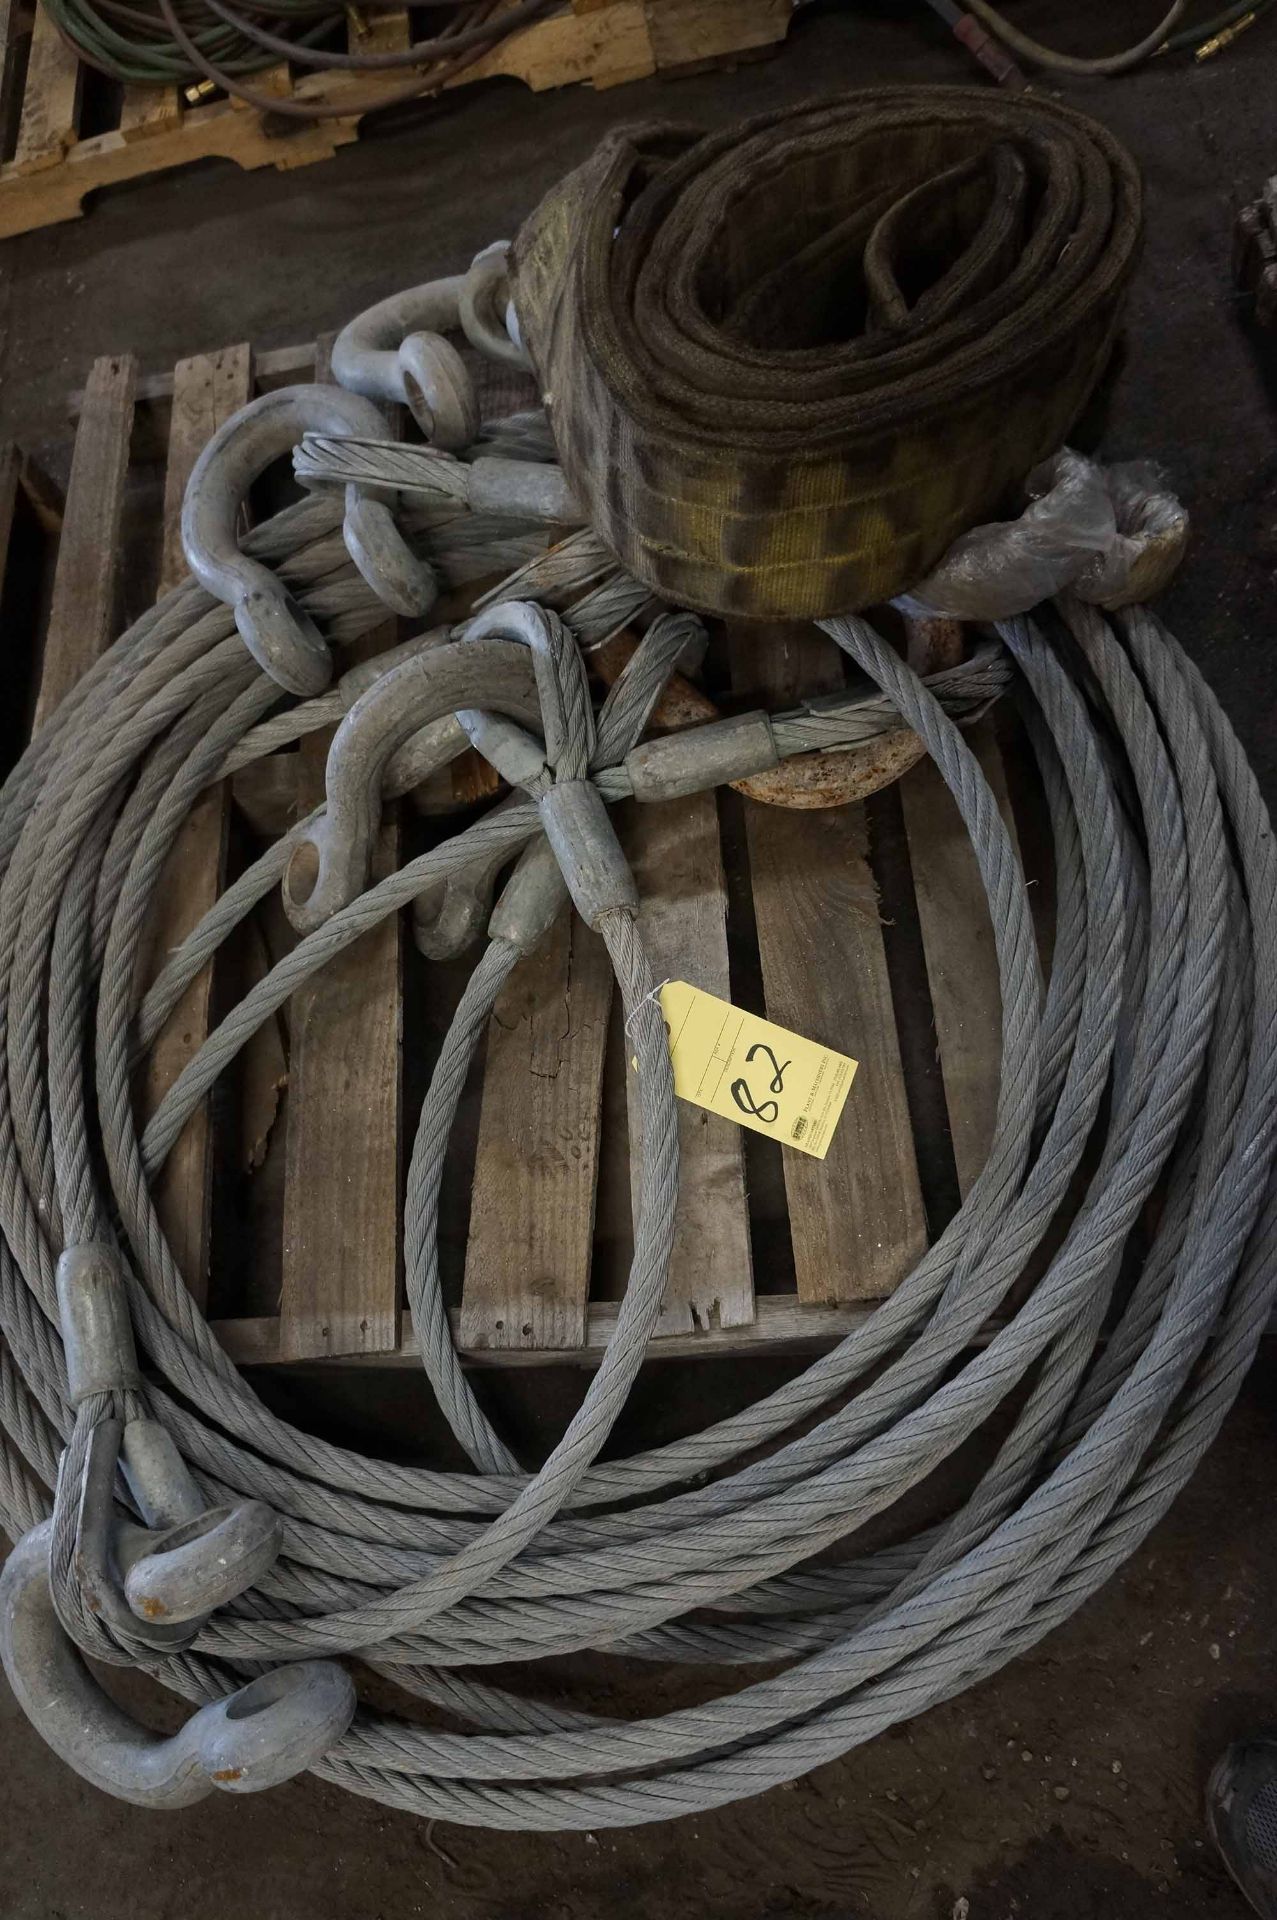 LOT CONSISTING OF: wire sling rope & straps